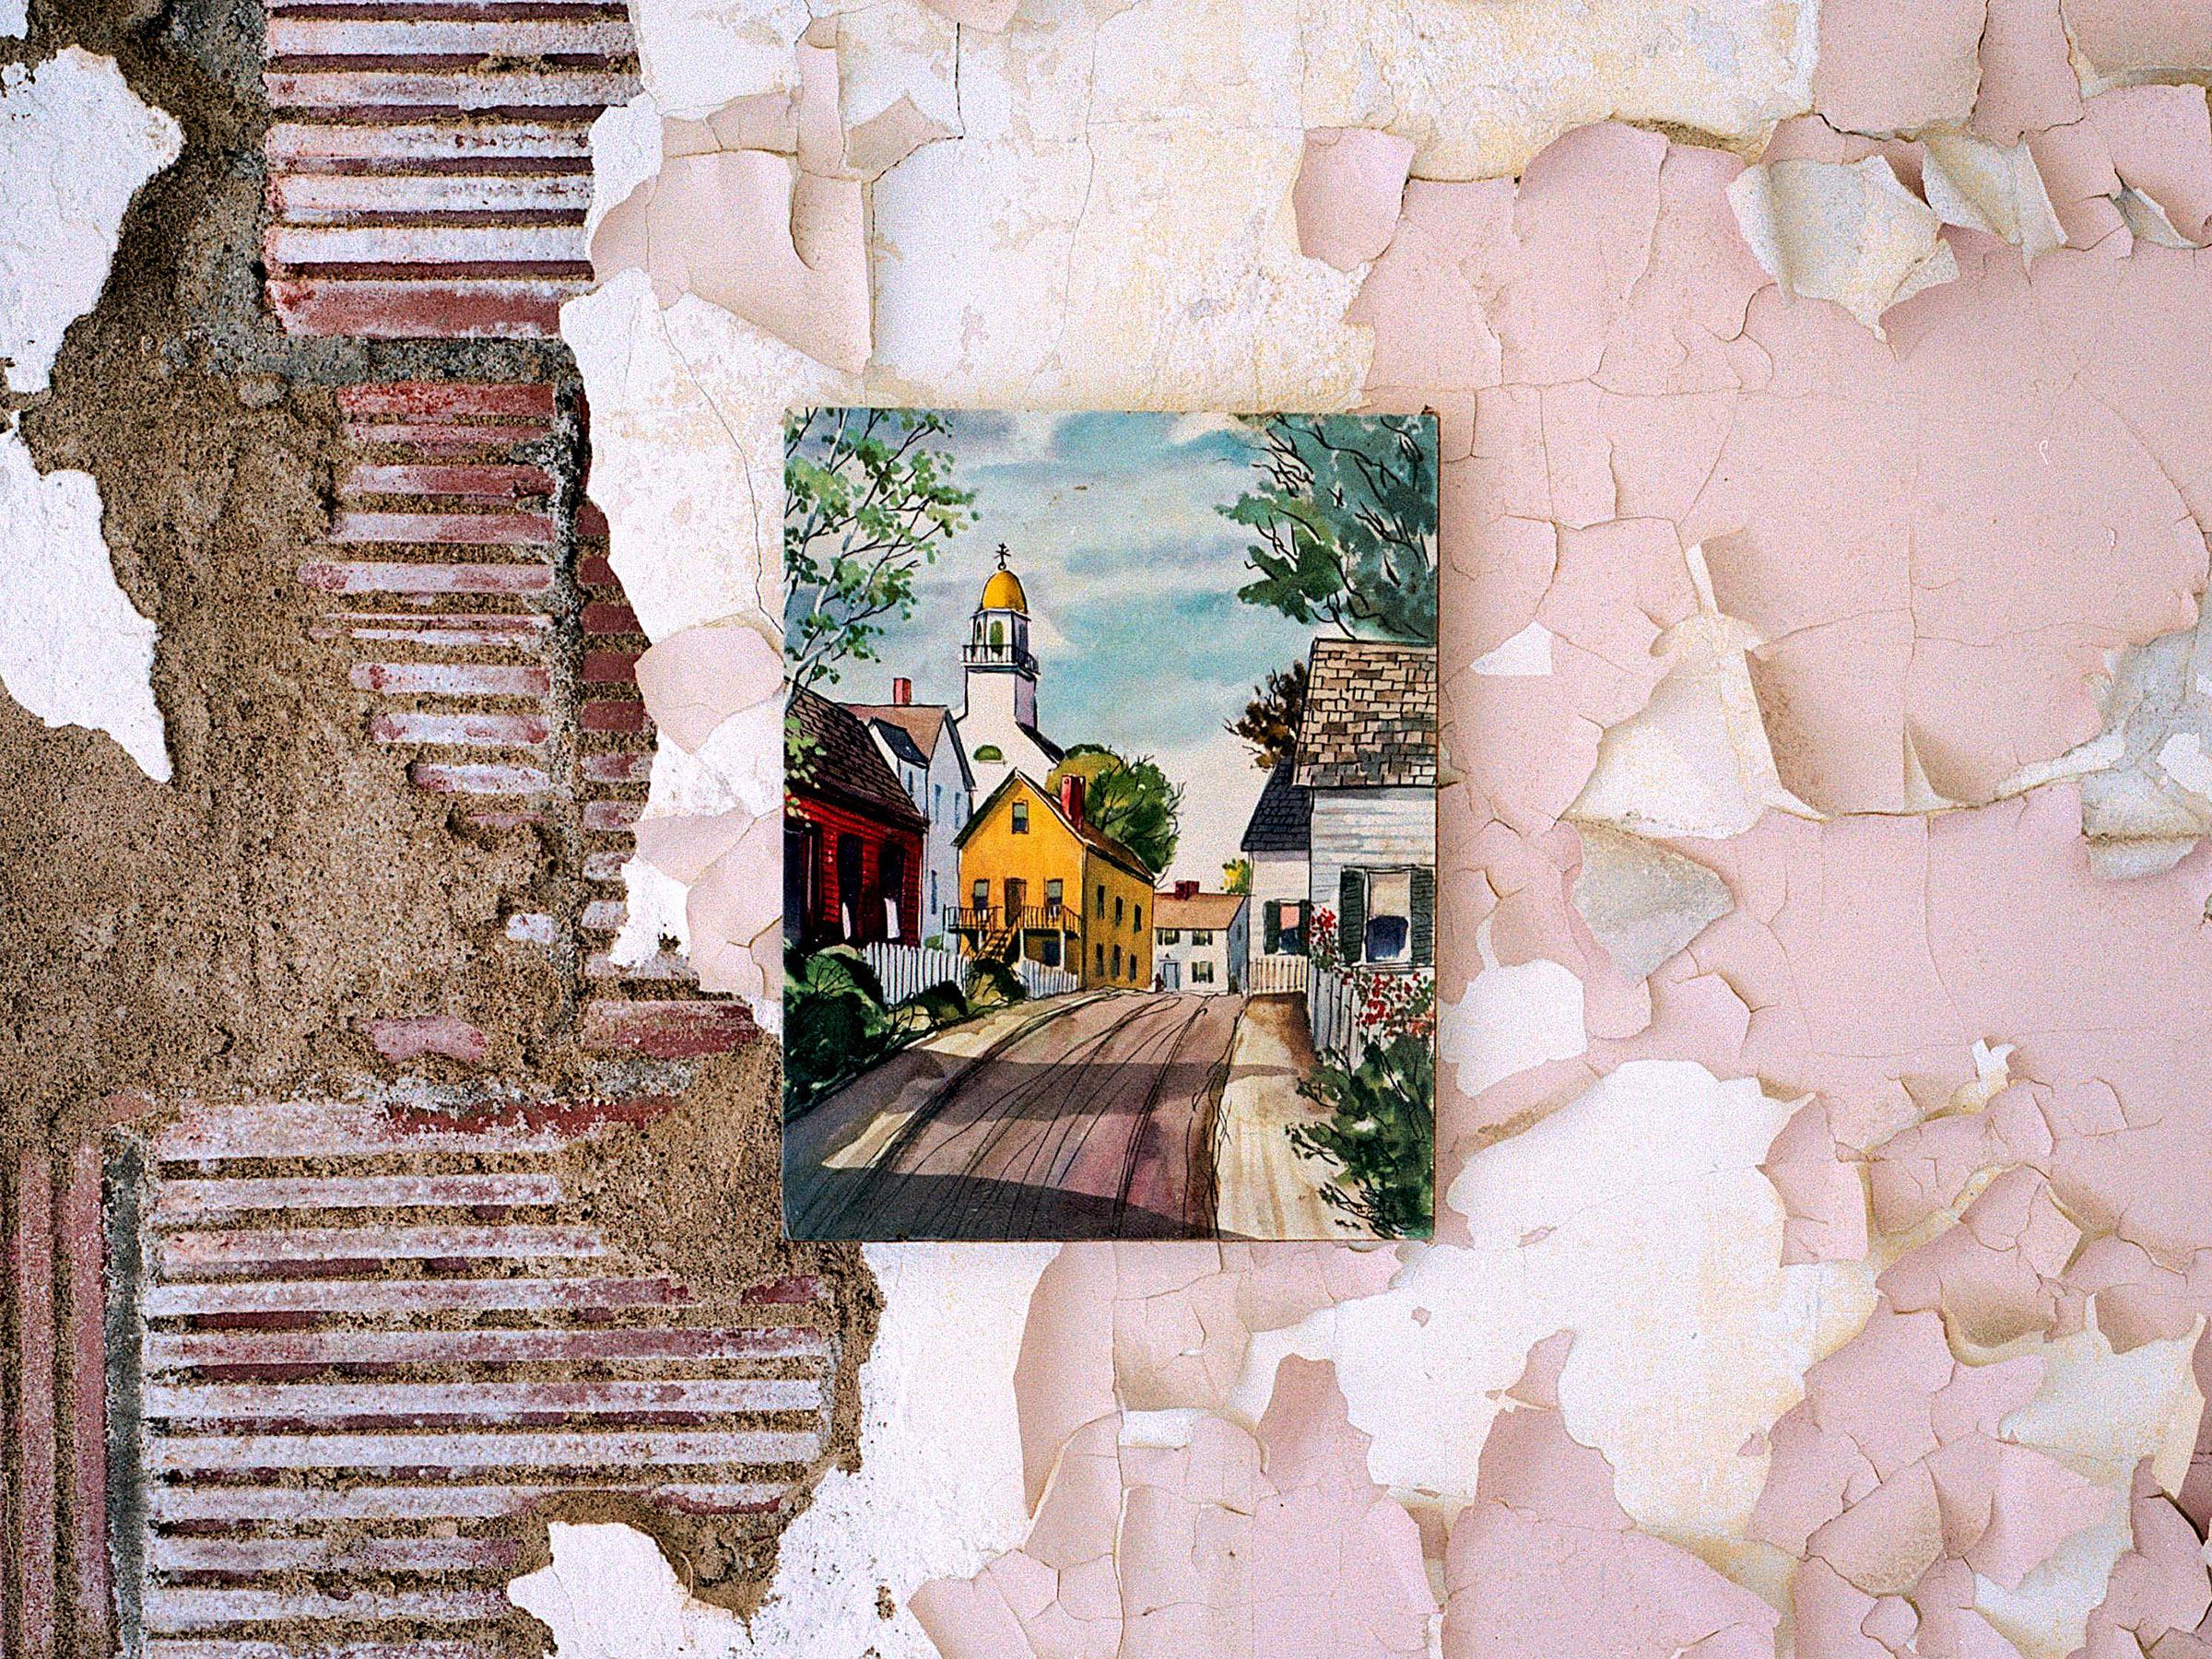 Phillip Buehler Color Photograph - "Church Dome" color photograph, rose pink abstract wall, town road landscape